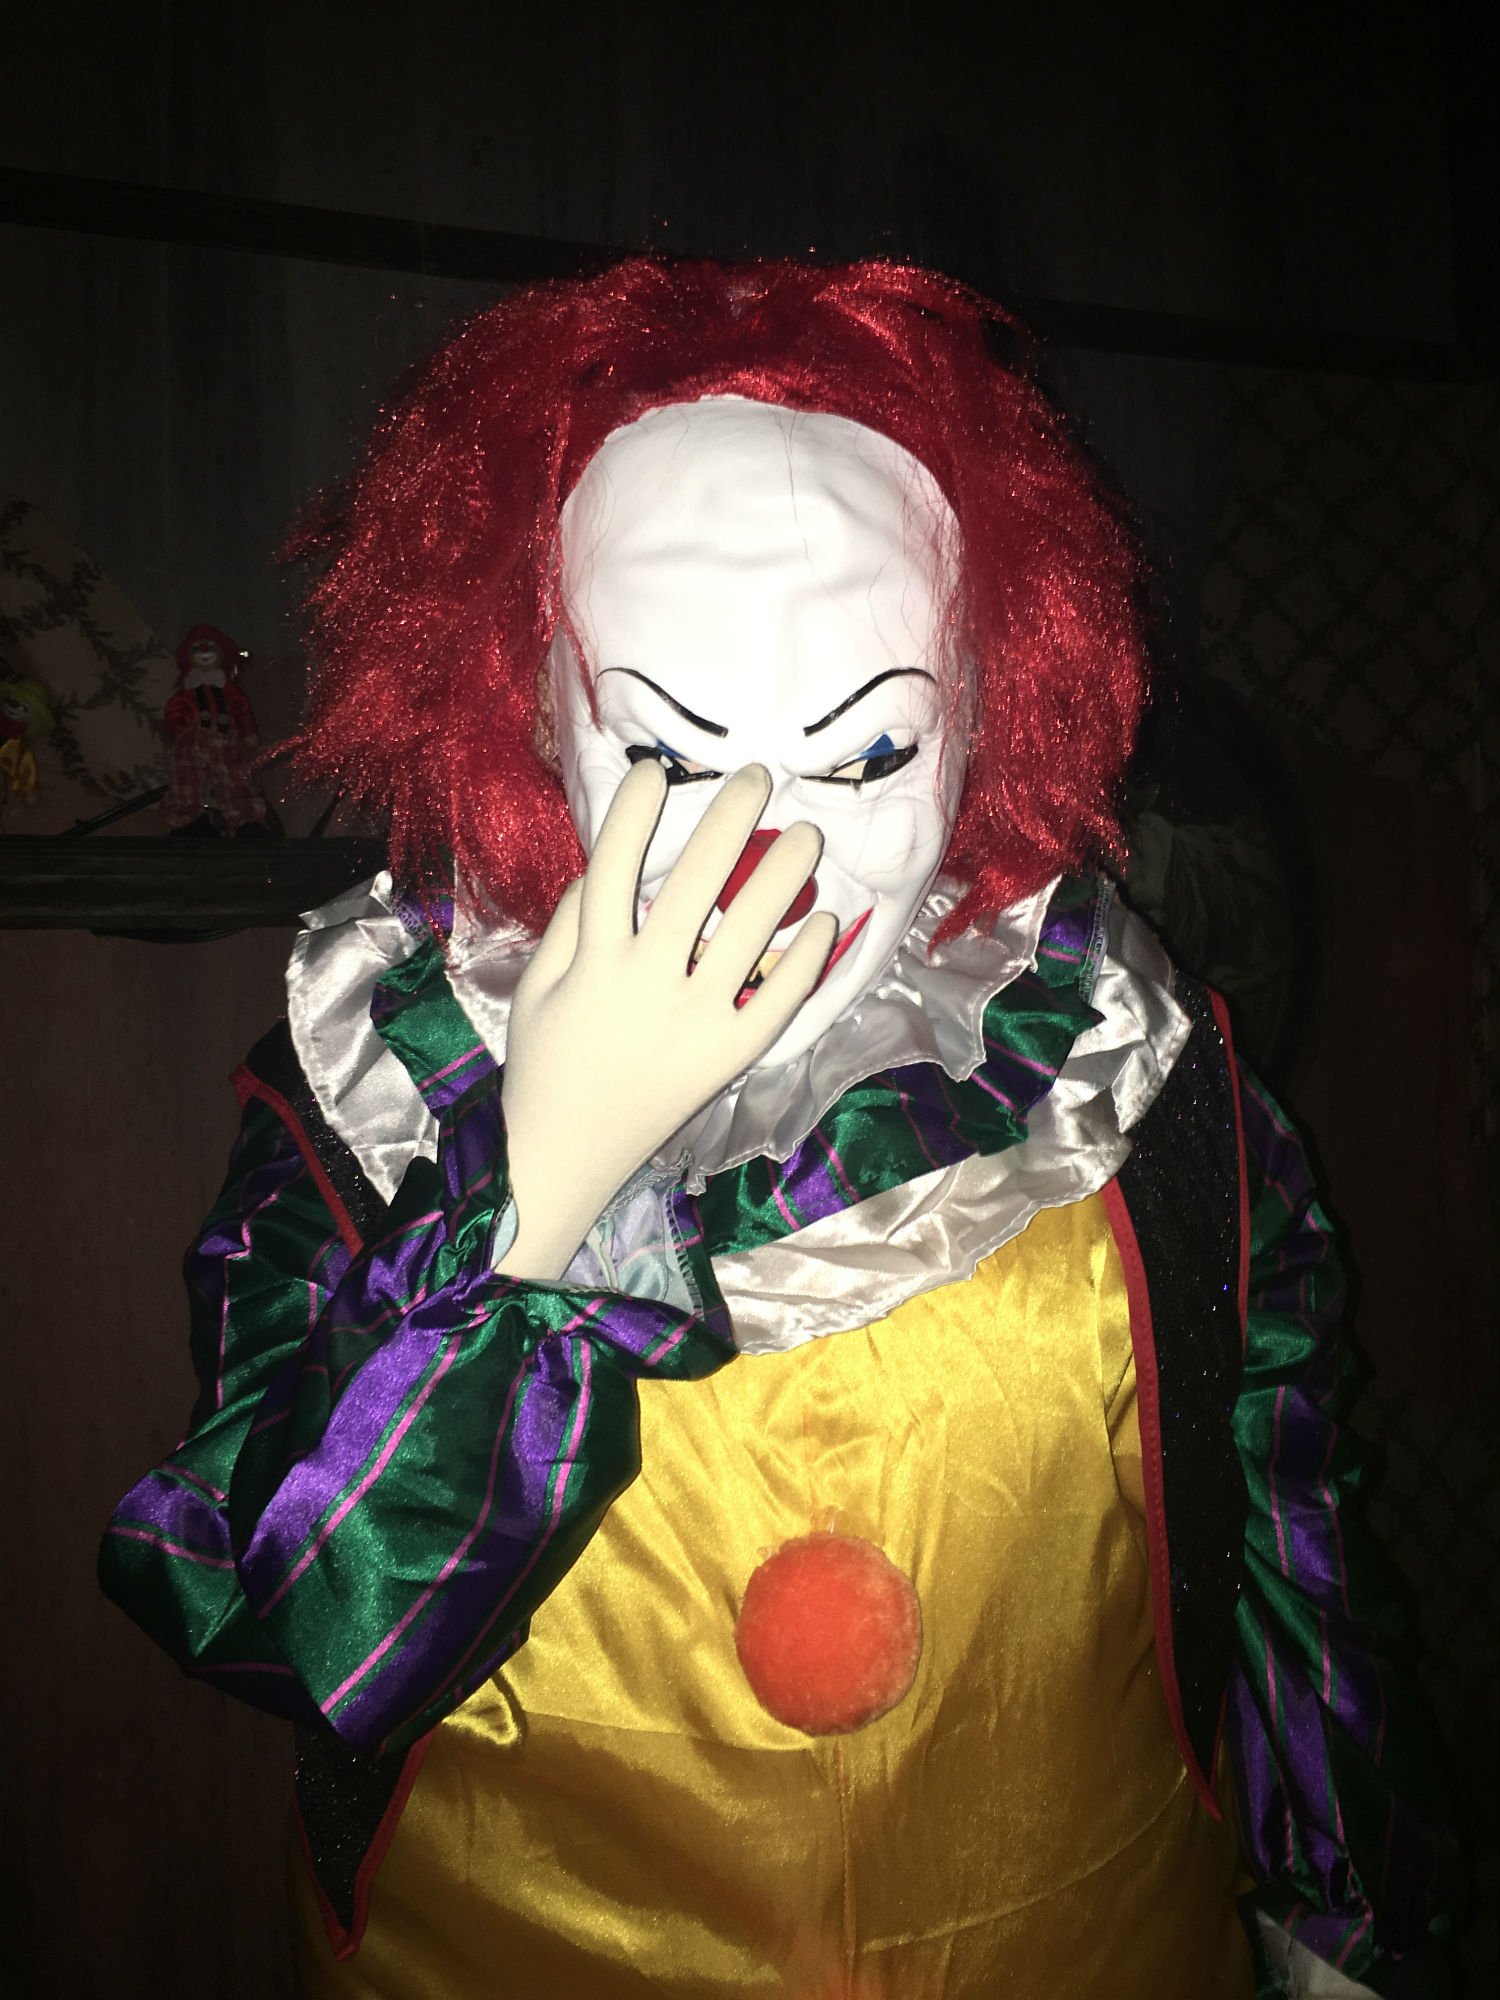 I Survived A Trip Through The Neibolt Street House From Stephen King’s It